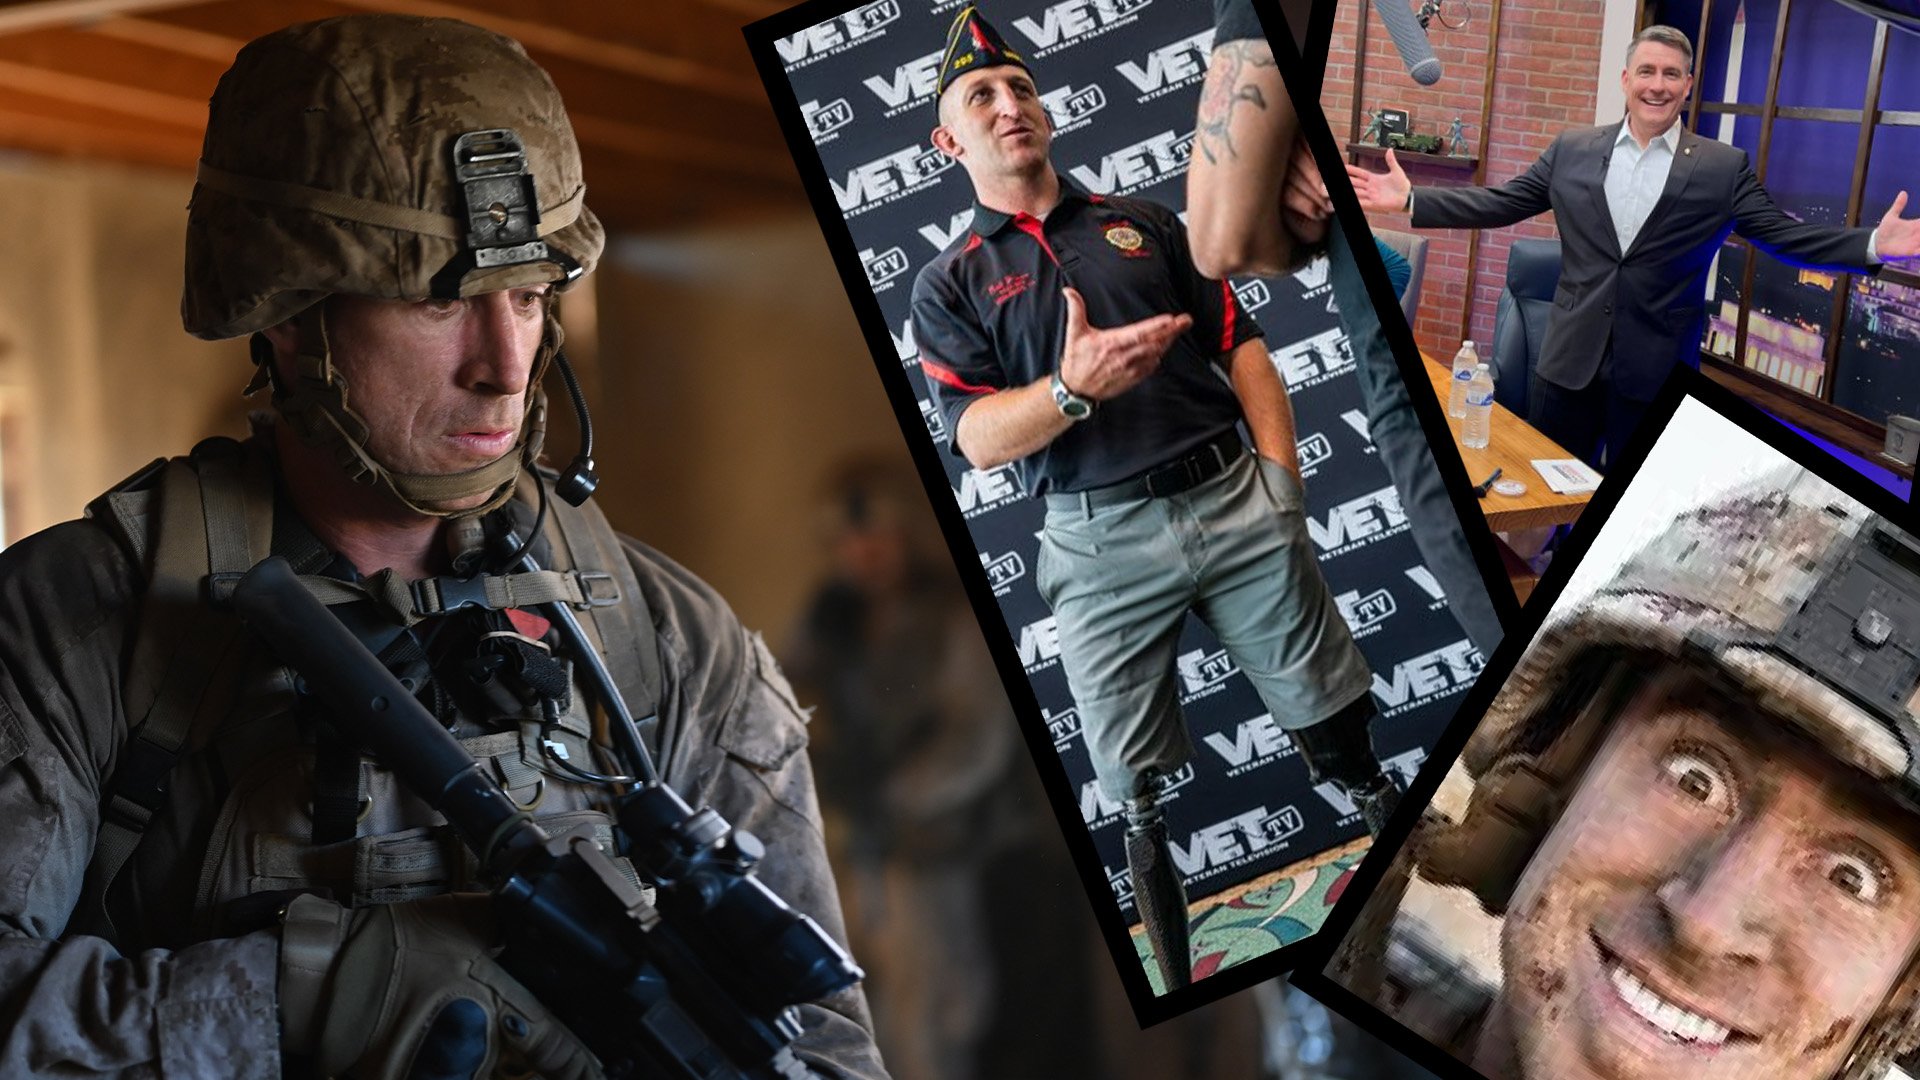 Founded in 2016 and known for its ribald, grunt-centric humor, VET Tv enters 2023 as a smarter, grittier, and deeper streaming service, reflecting the armed forces and veterans it wants to reach. Coffee or Die Magazine composite.